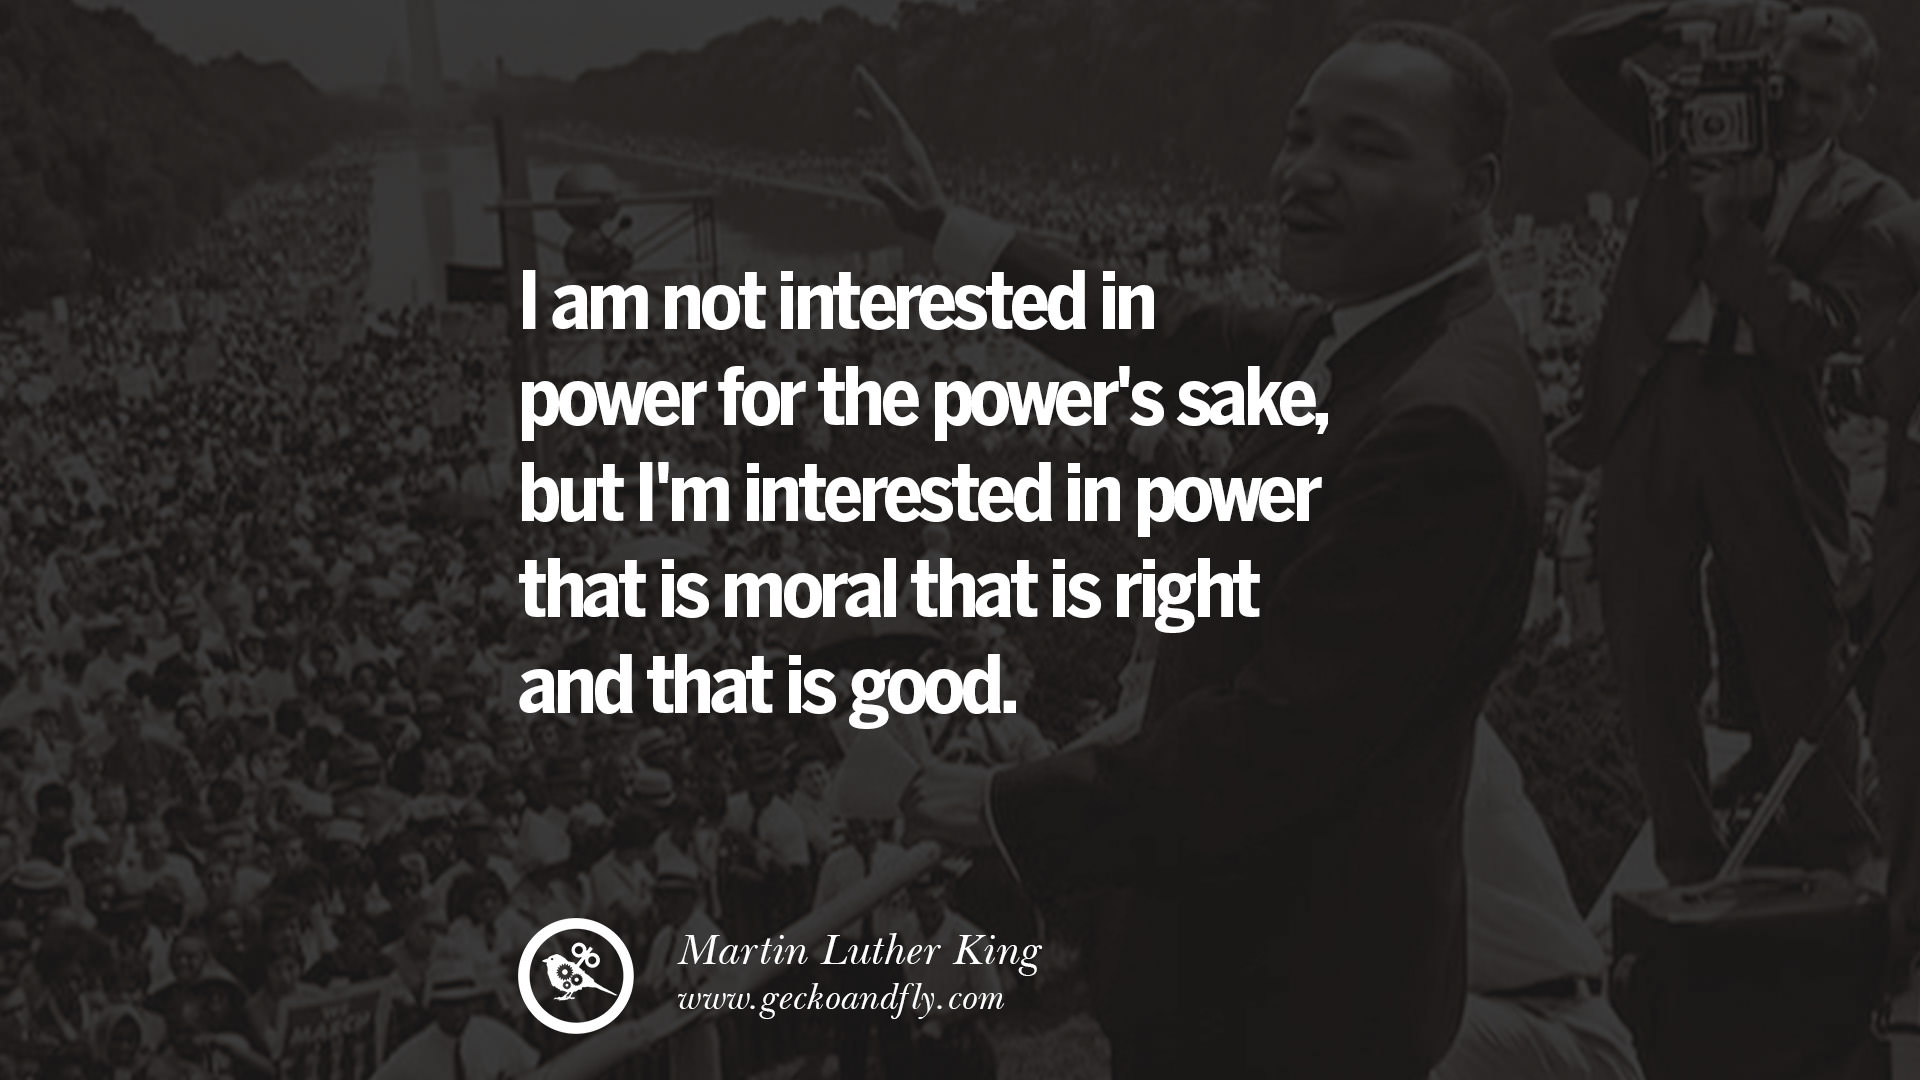 30 Powerful Martin Luther King Jr Quotes on Equality Rights, Black Lives Matter and More